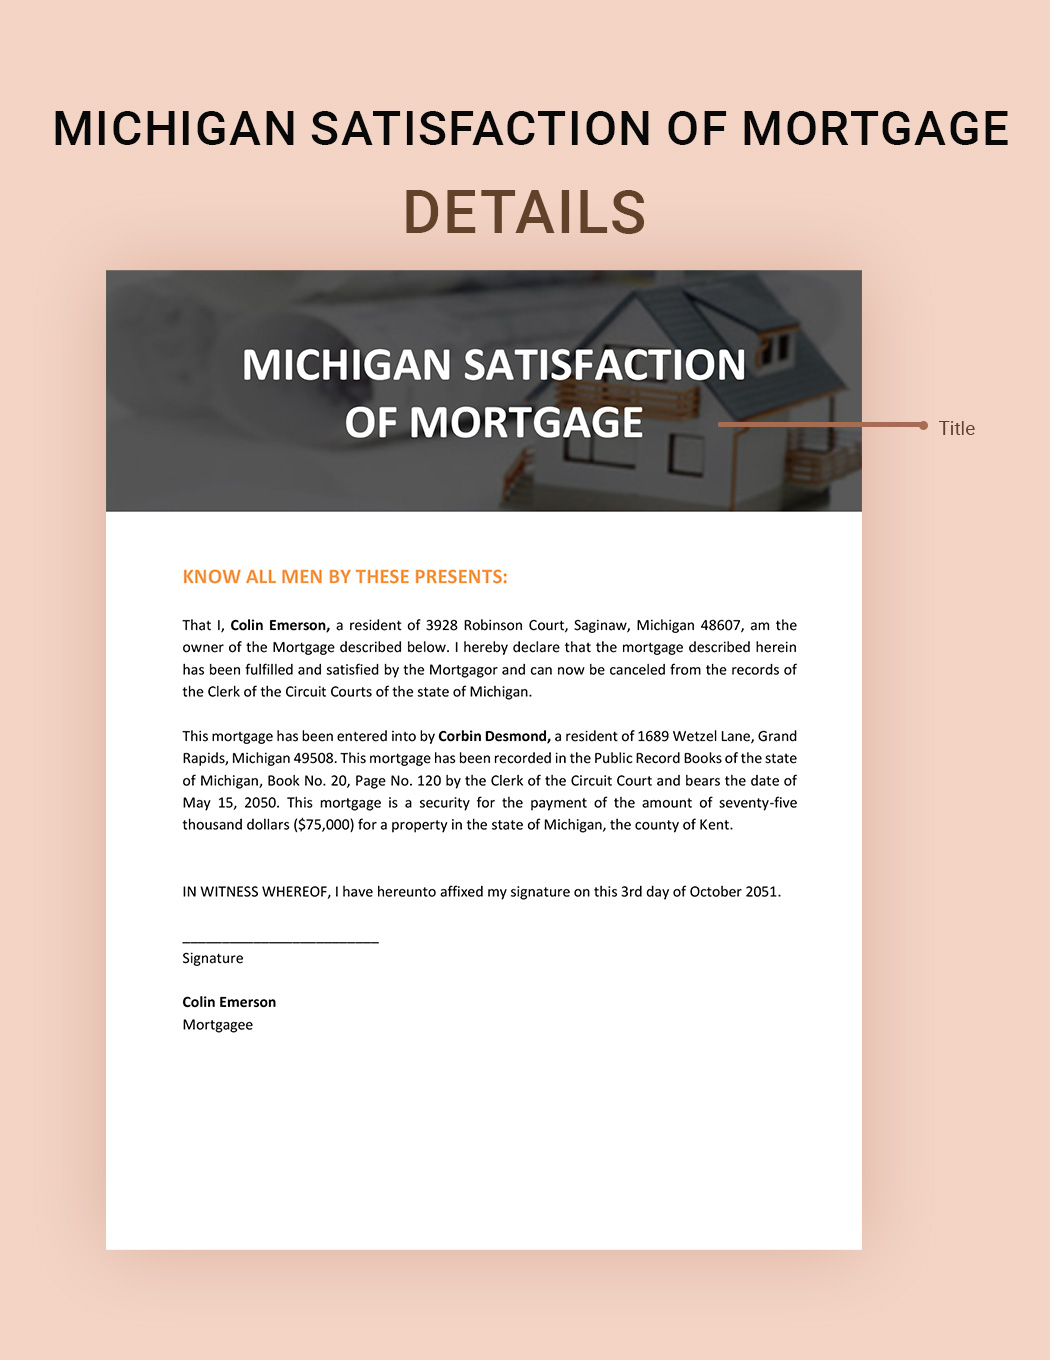 Michigan Satisfaction of Mortgage Template